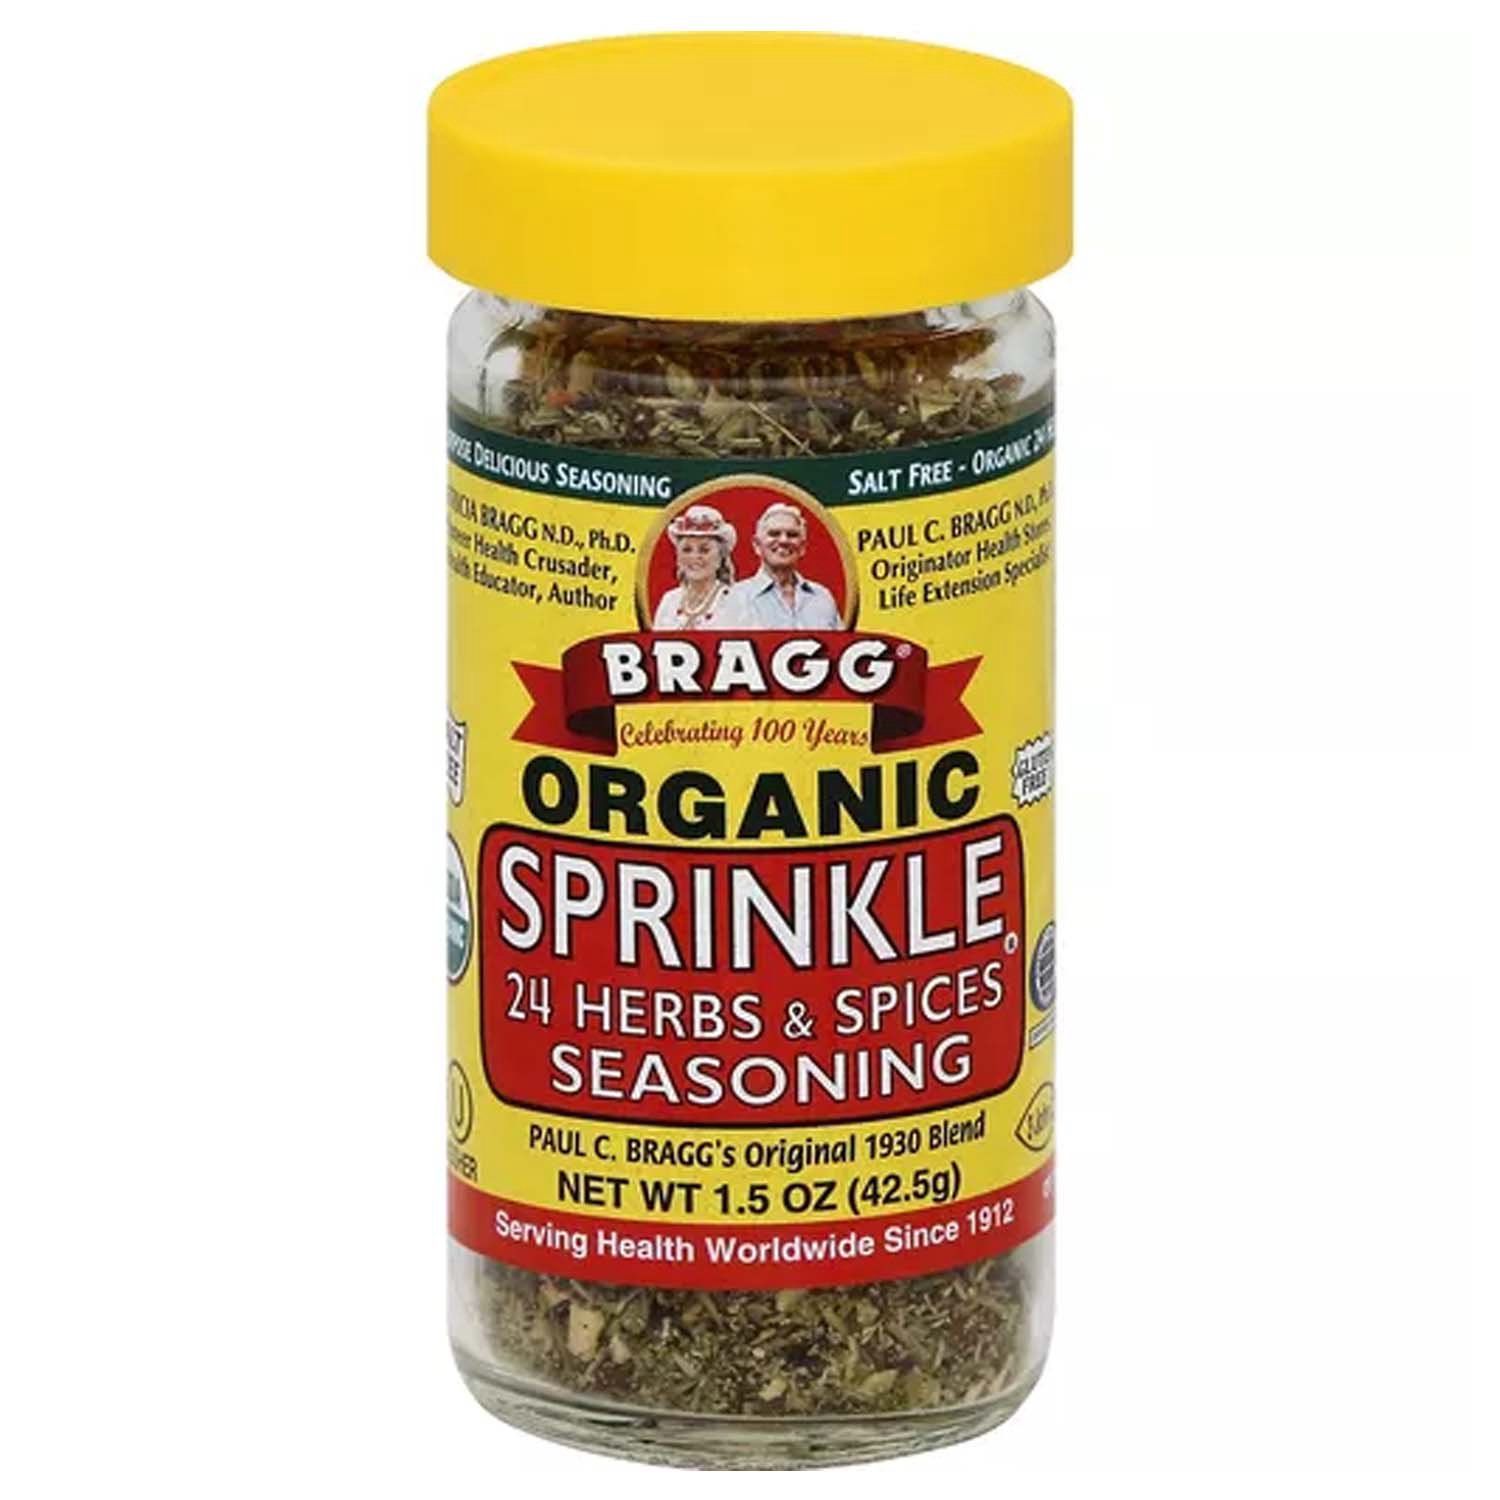 Save on Nature's Promise Organic Seasoning Mix Ranch Dip Order Online  Delivery